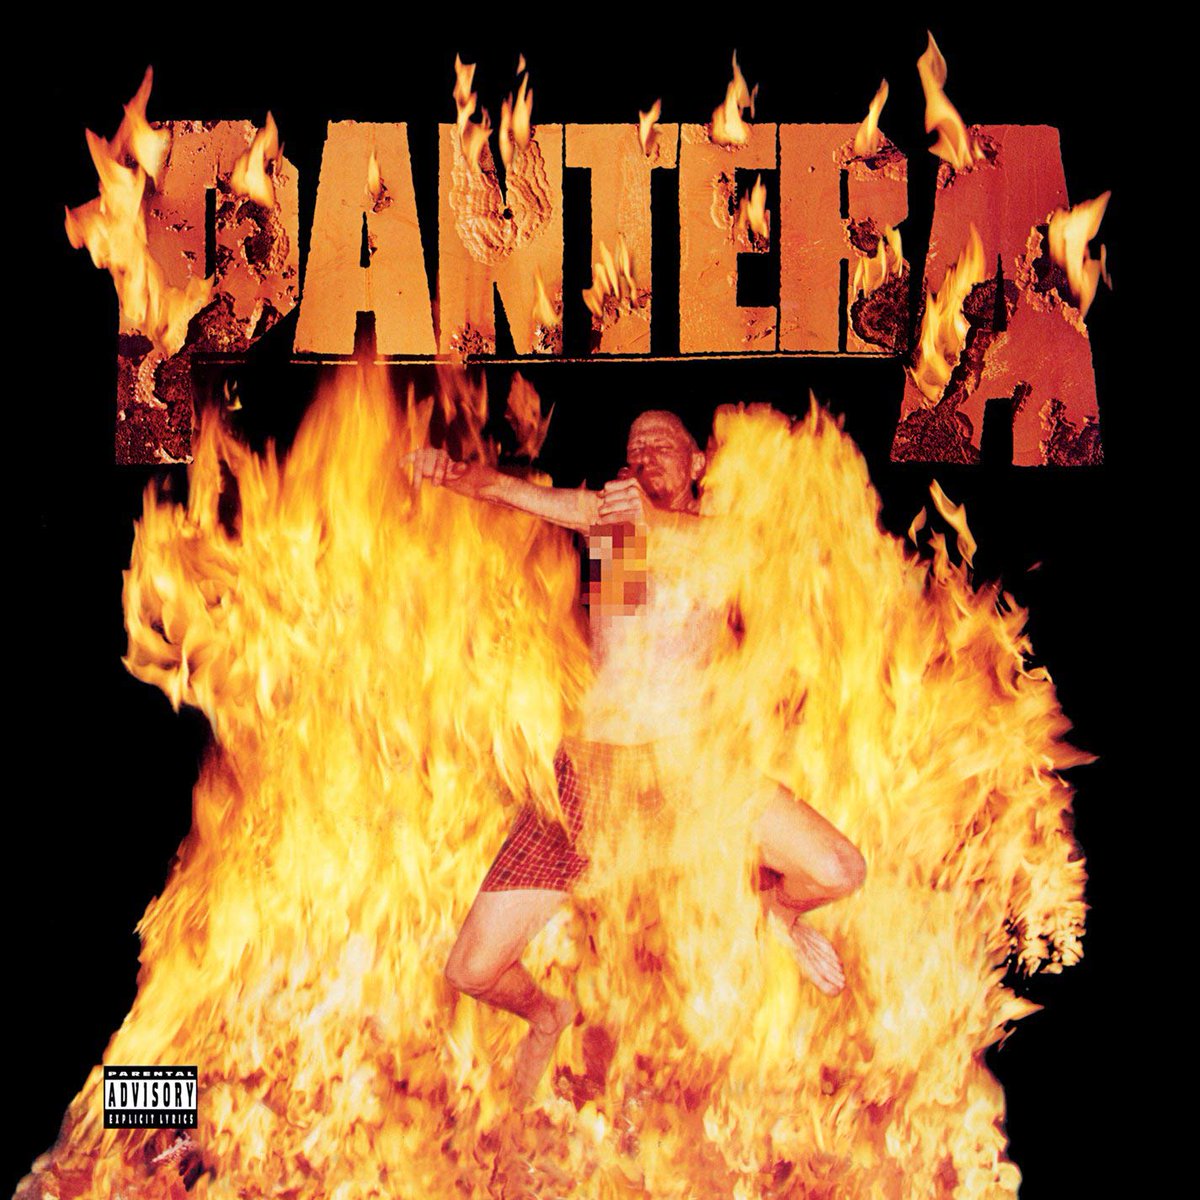 Share an album cover with flames on it. Pantera: Reinventing the Steel